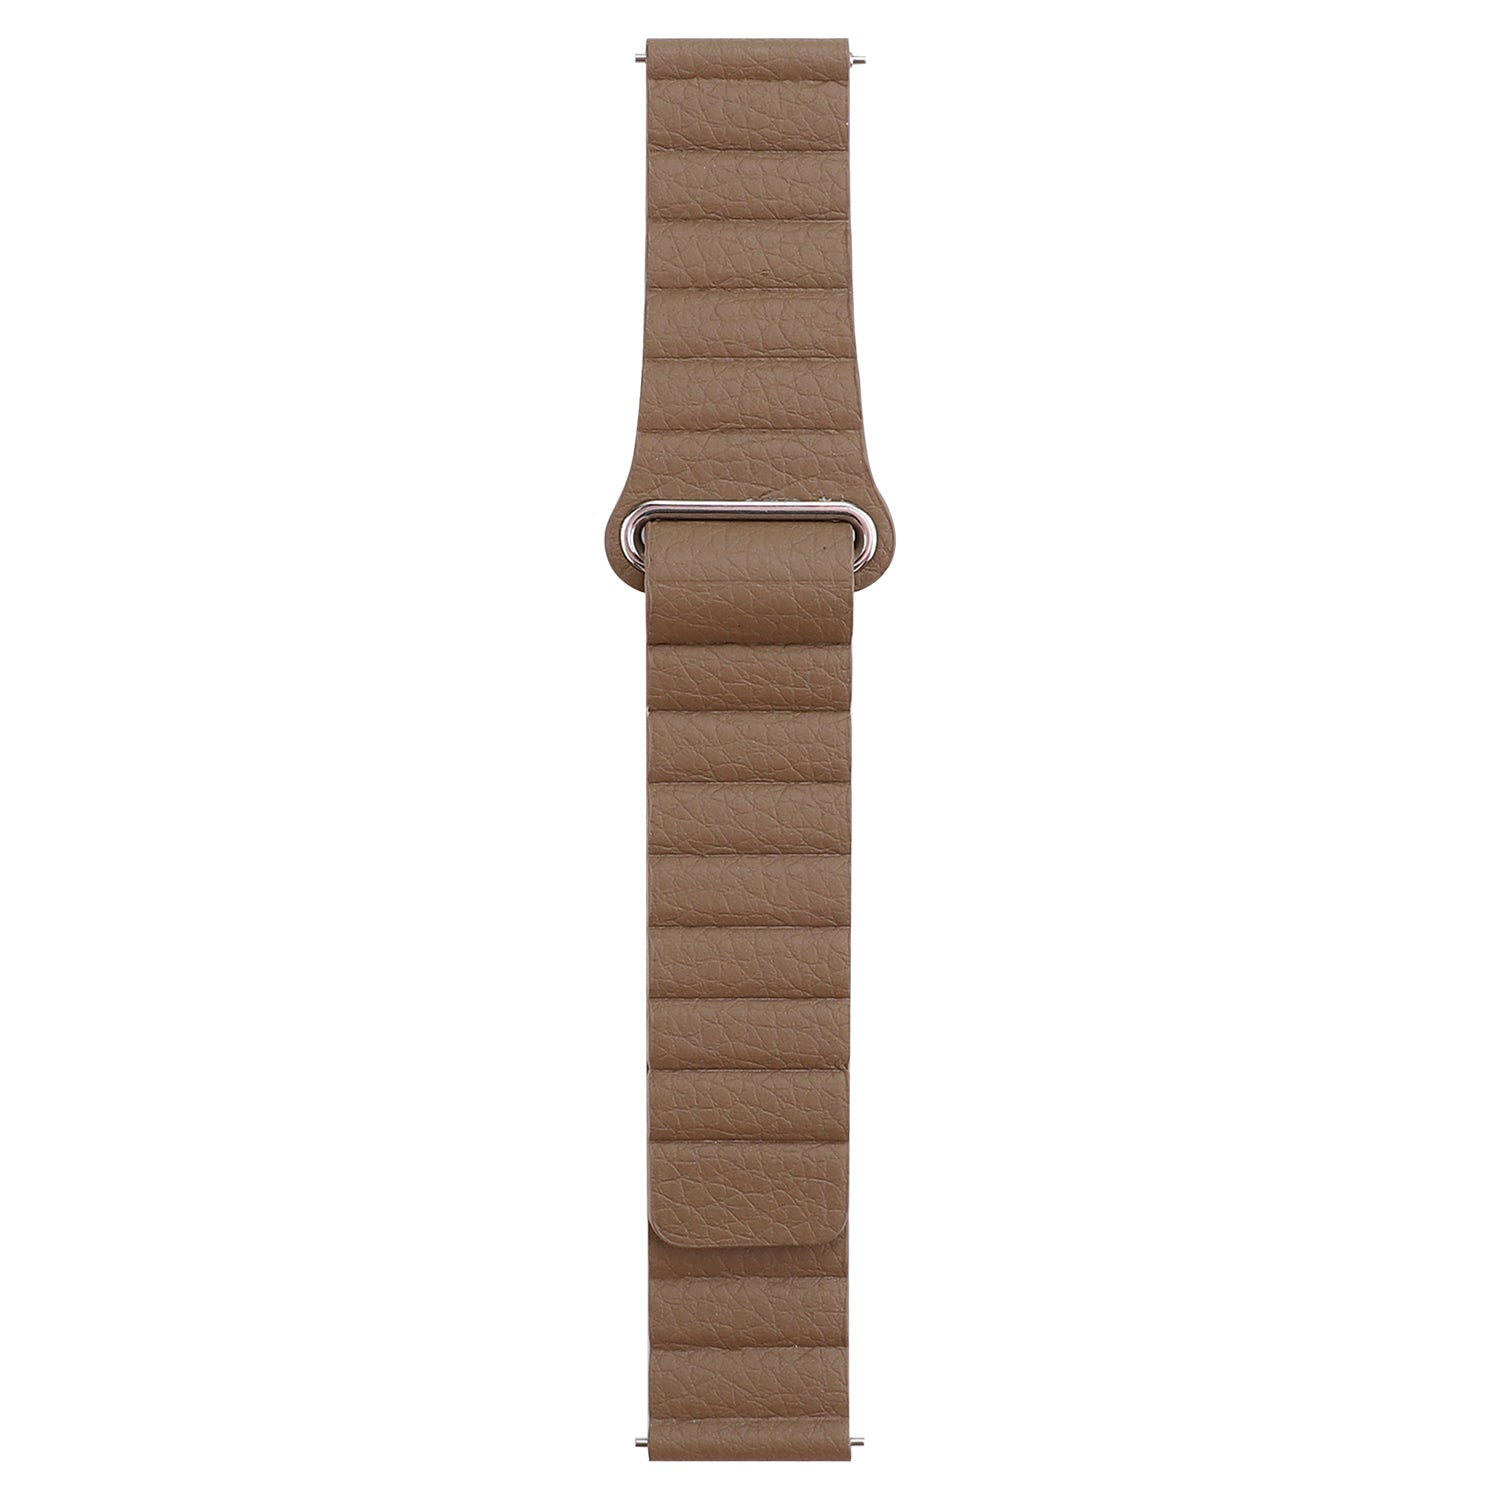 Genuine Leather Watchband Replacement 18mm for Garmin Move 3S/Active S - Khaki